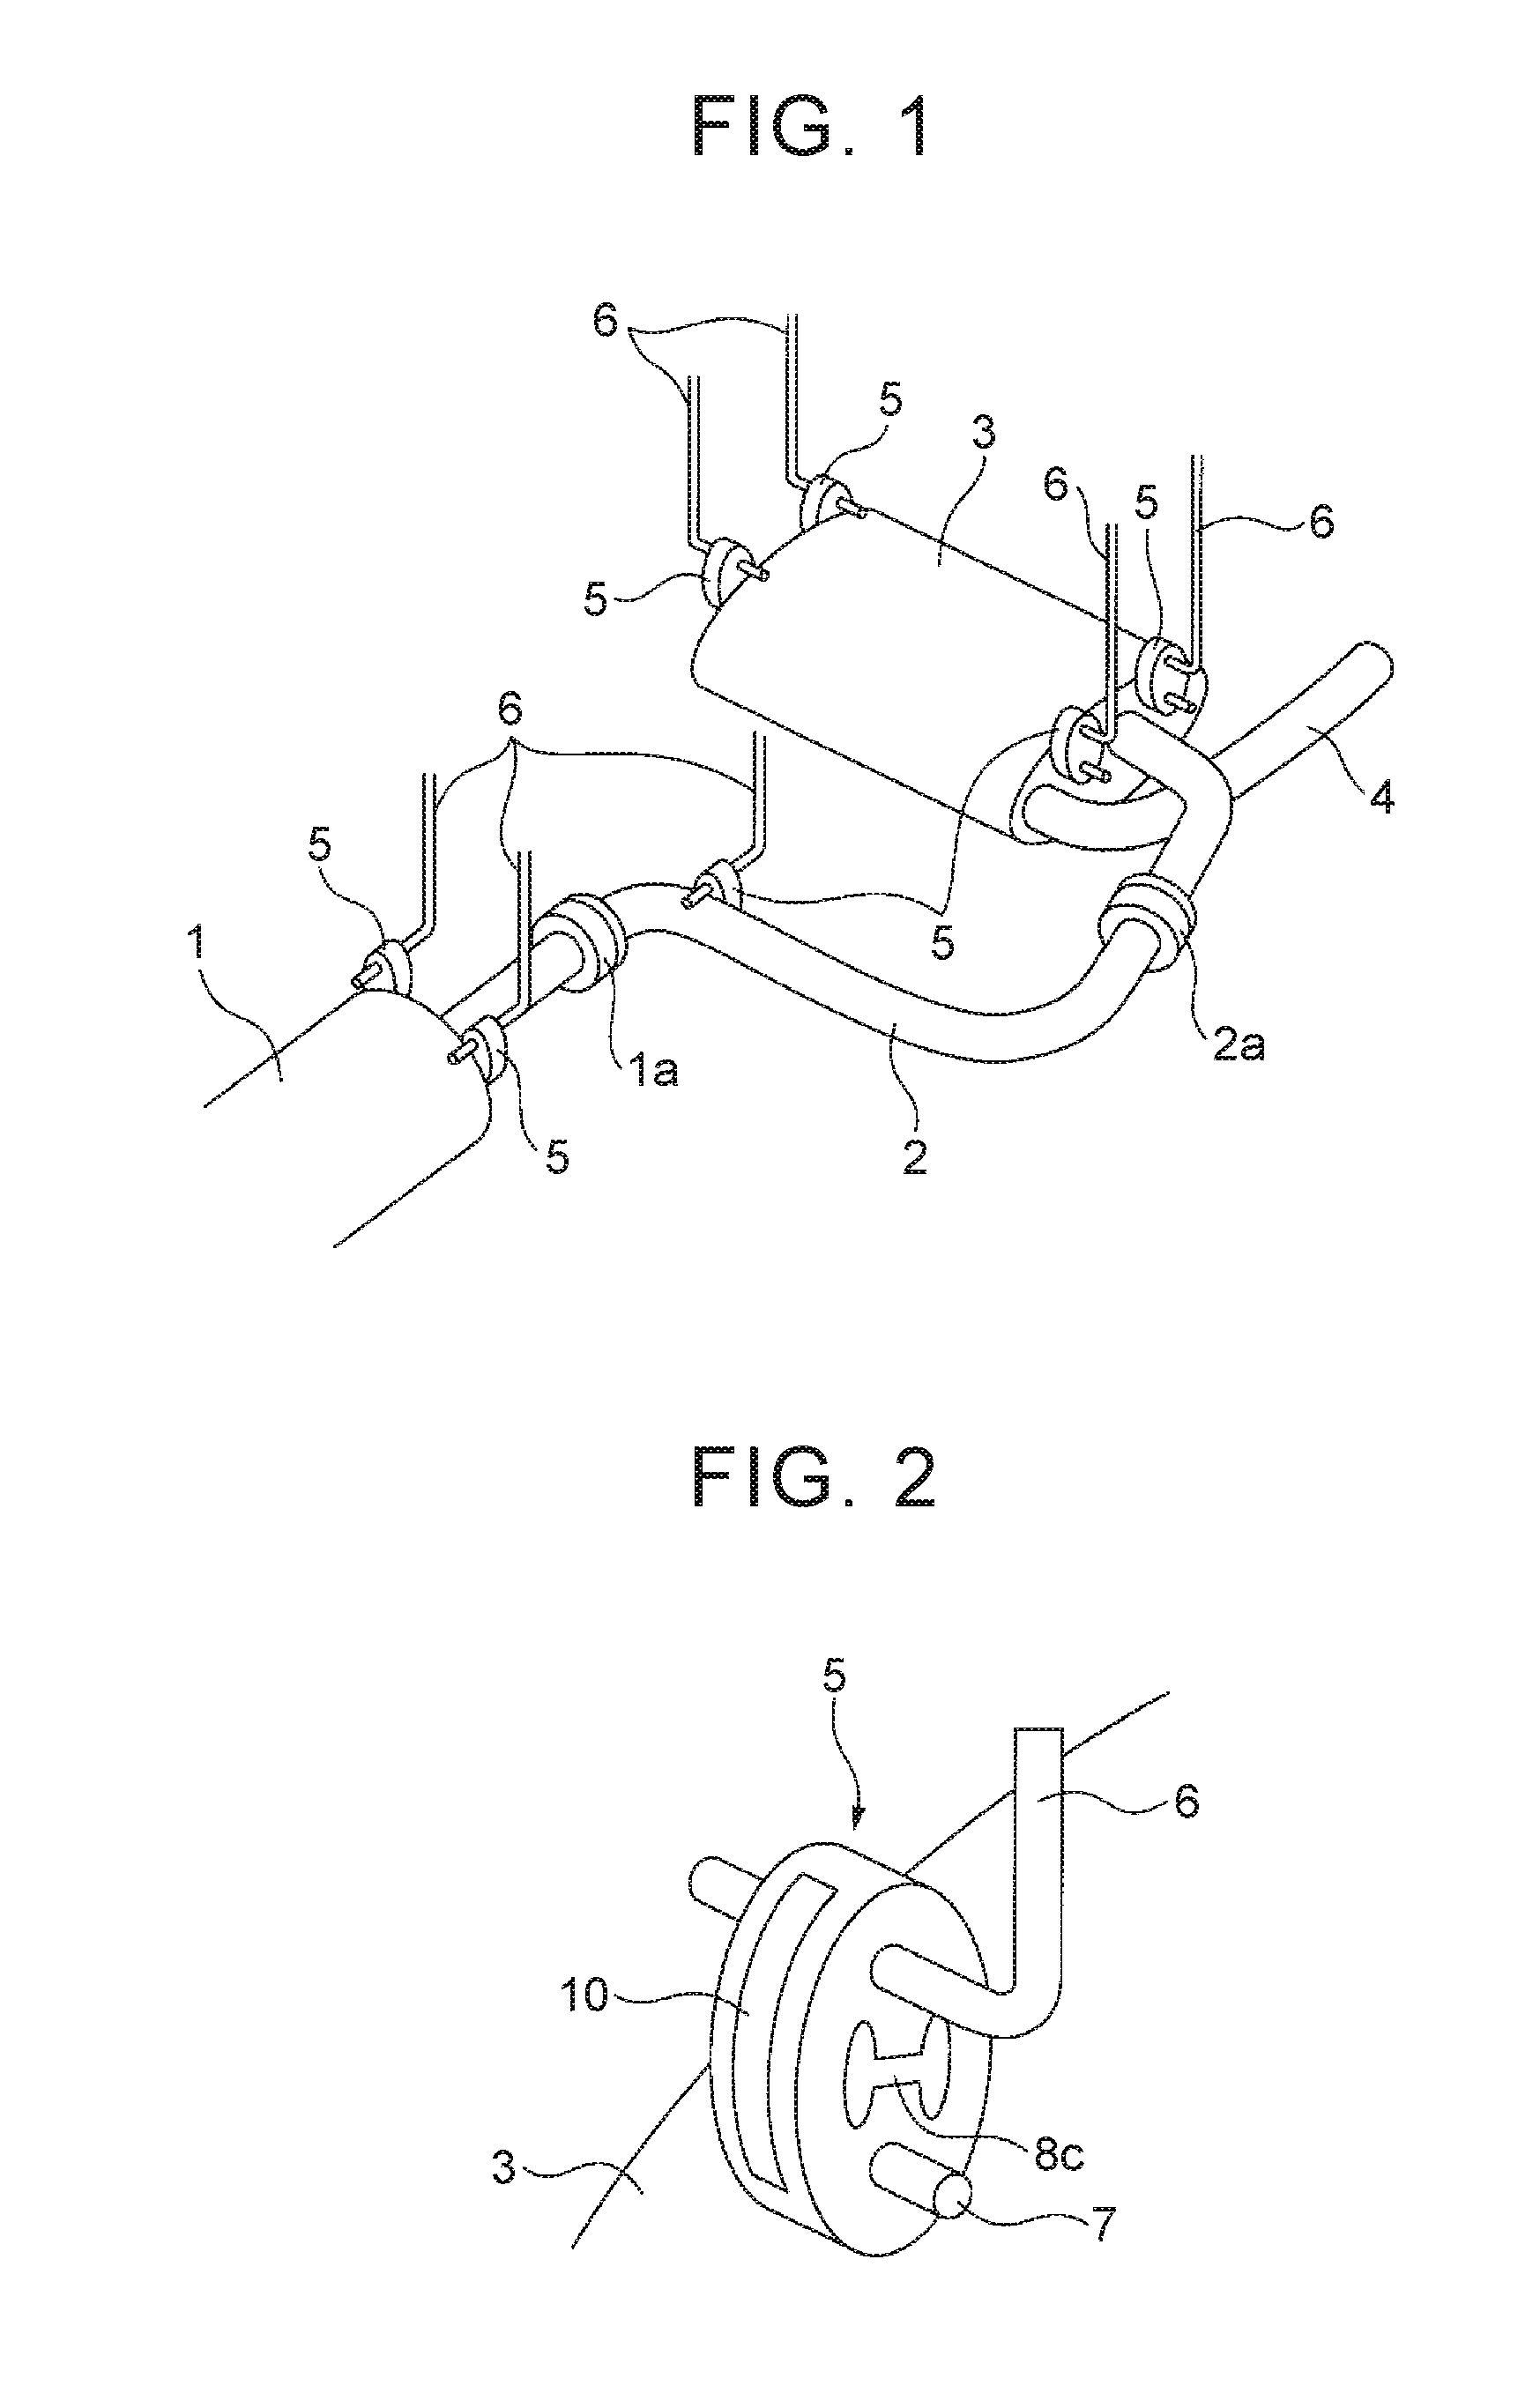 Vehicle engine exhaust system